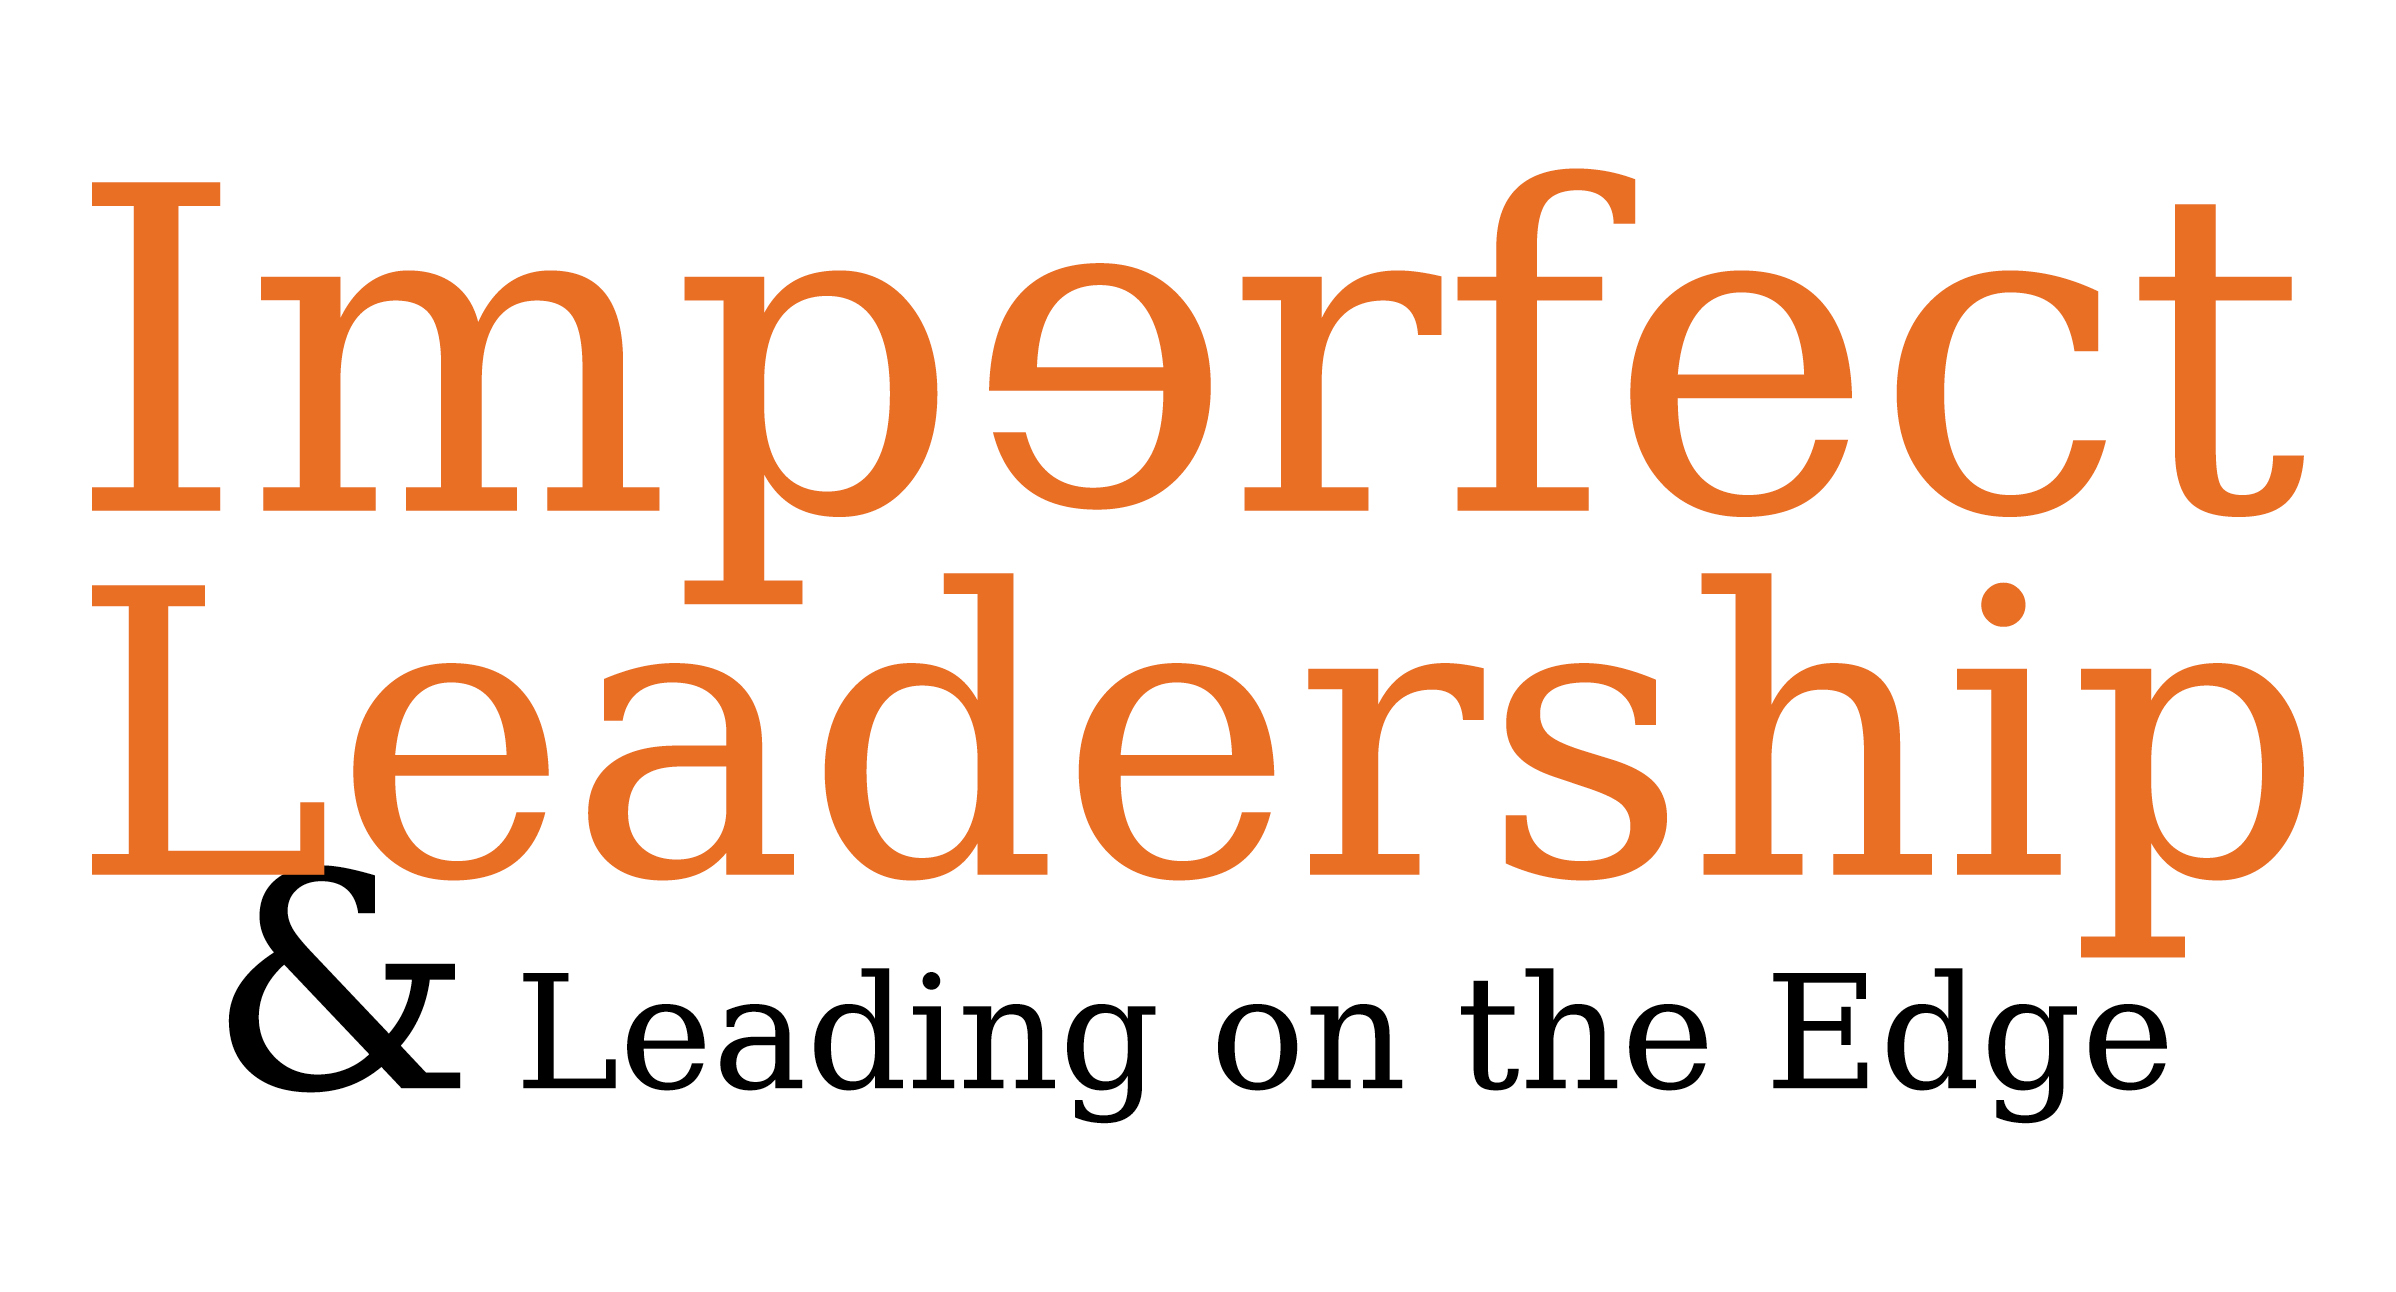 Steve Munby - Imperfect Leadership and Leading on the Edge